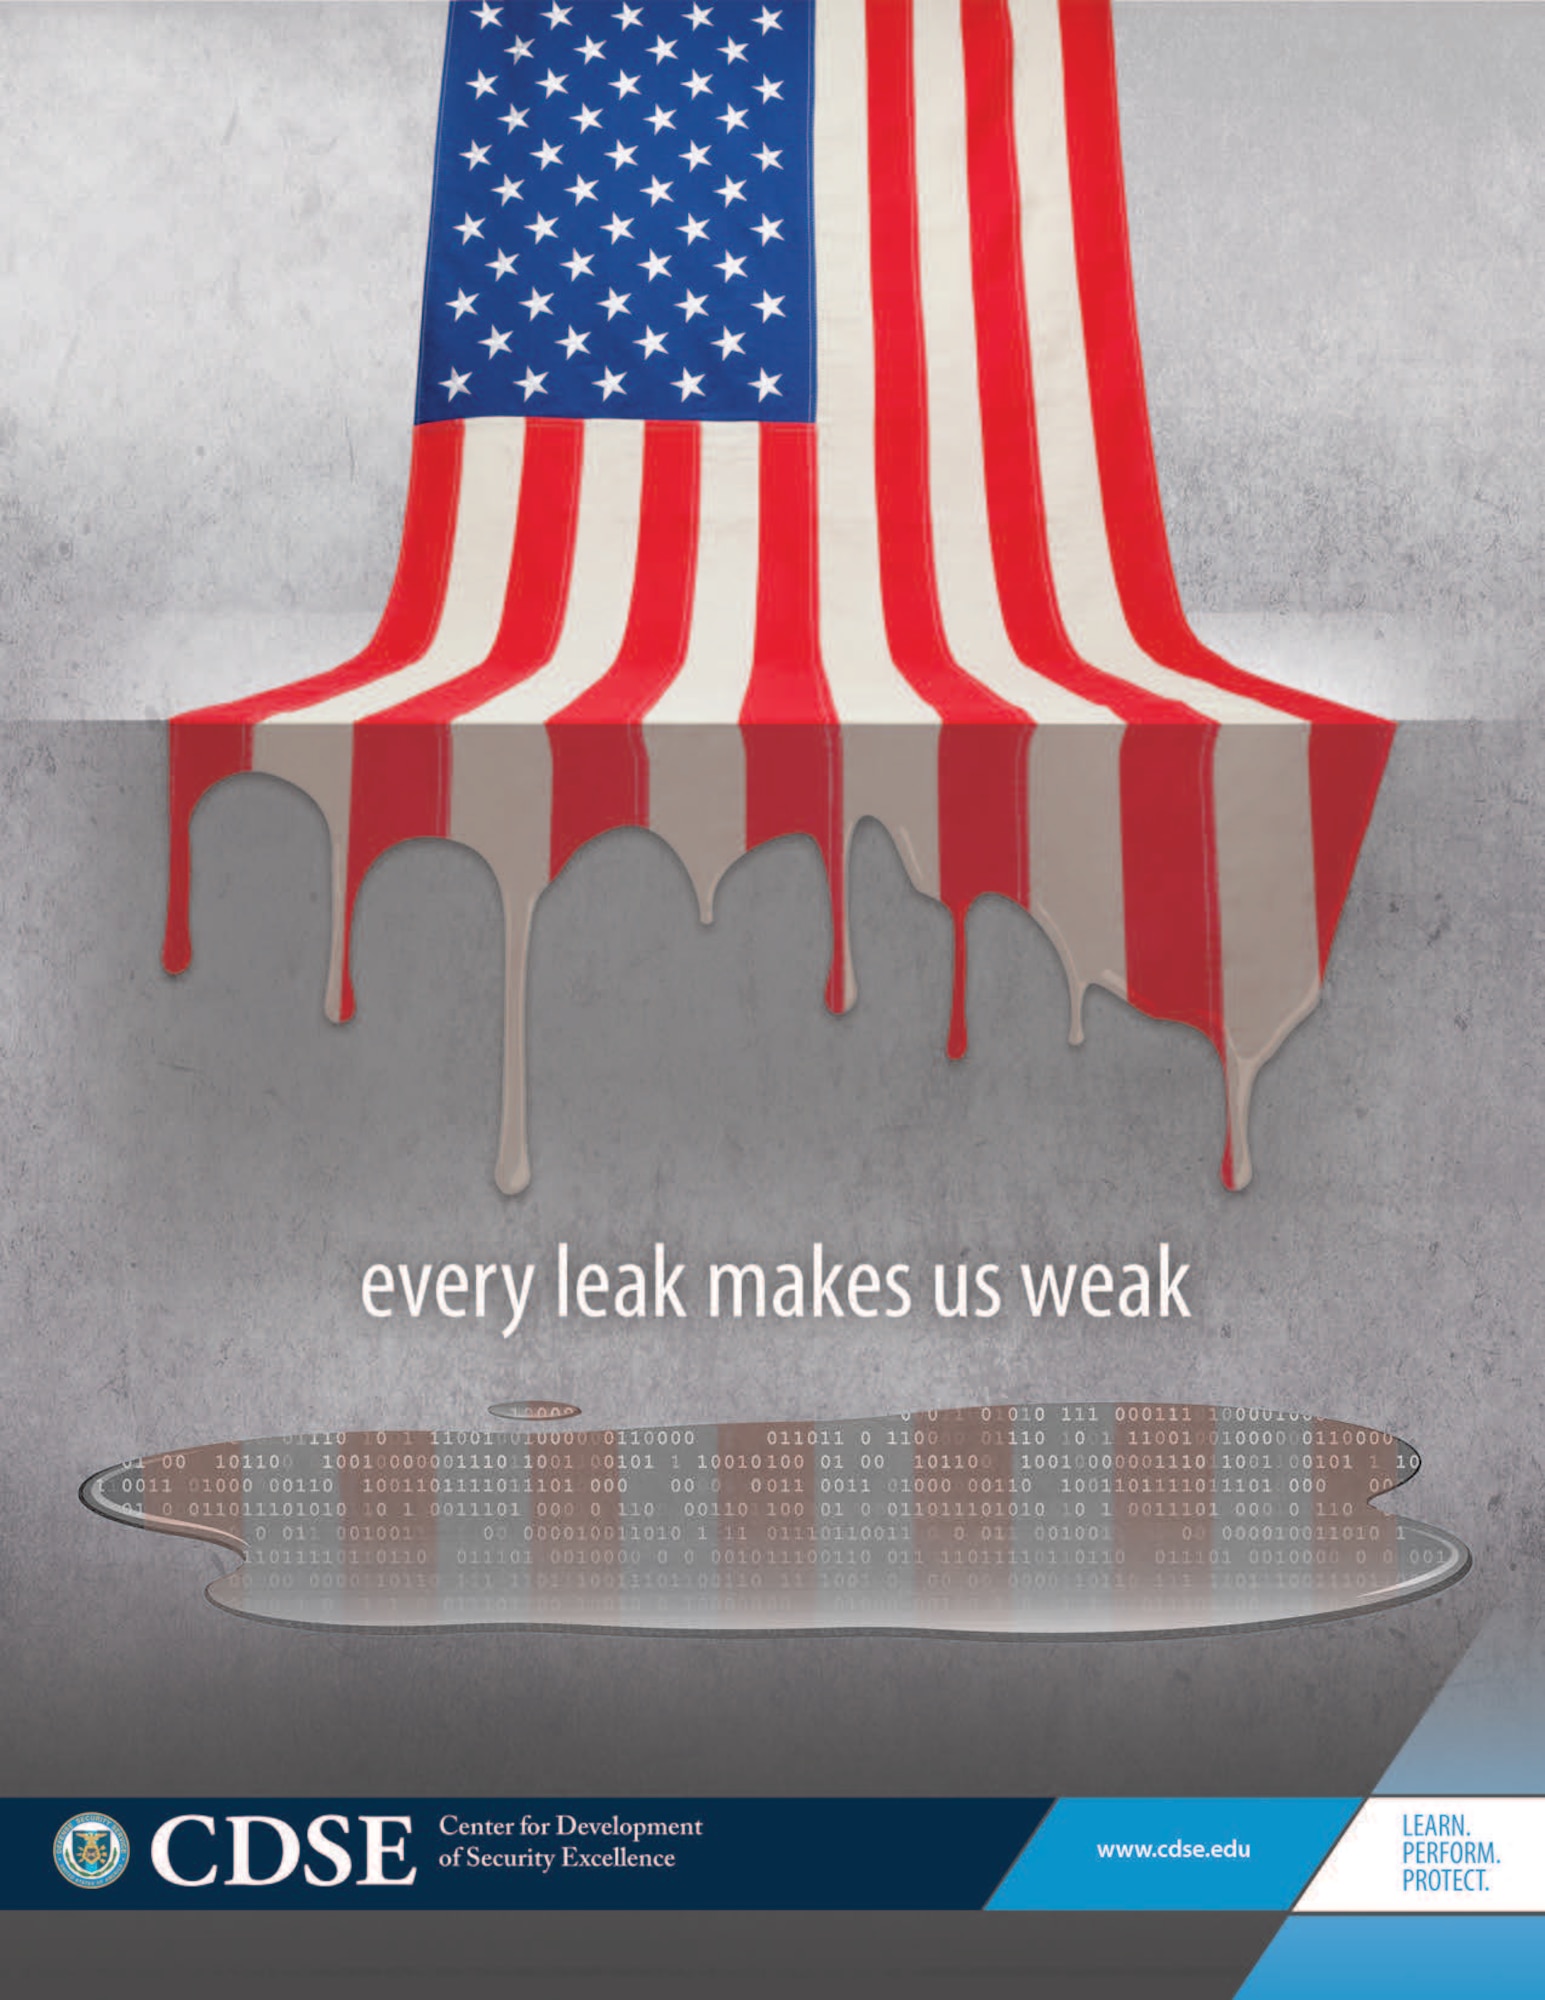 "Every Leak Makes Us Weak" poster from the Center for Development of Security Excellence. (Courtesy image)